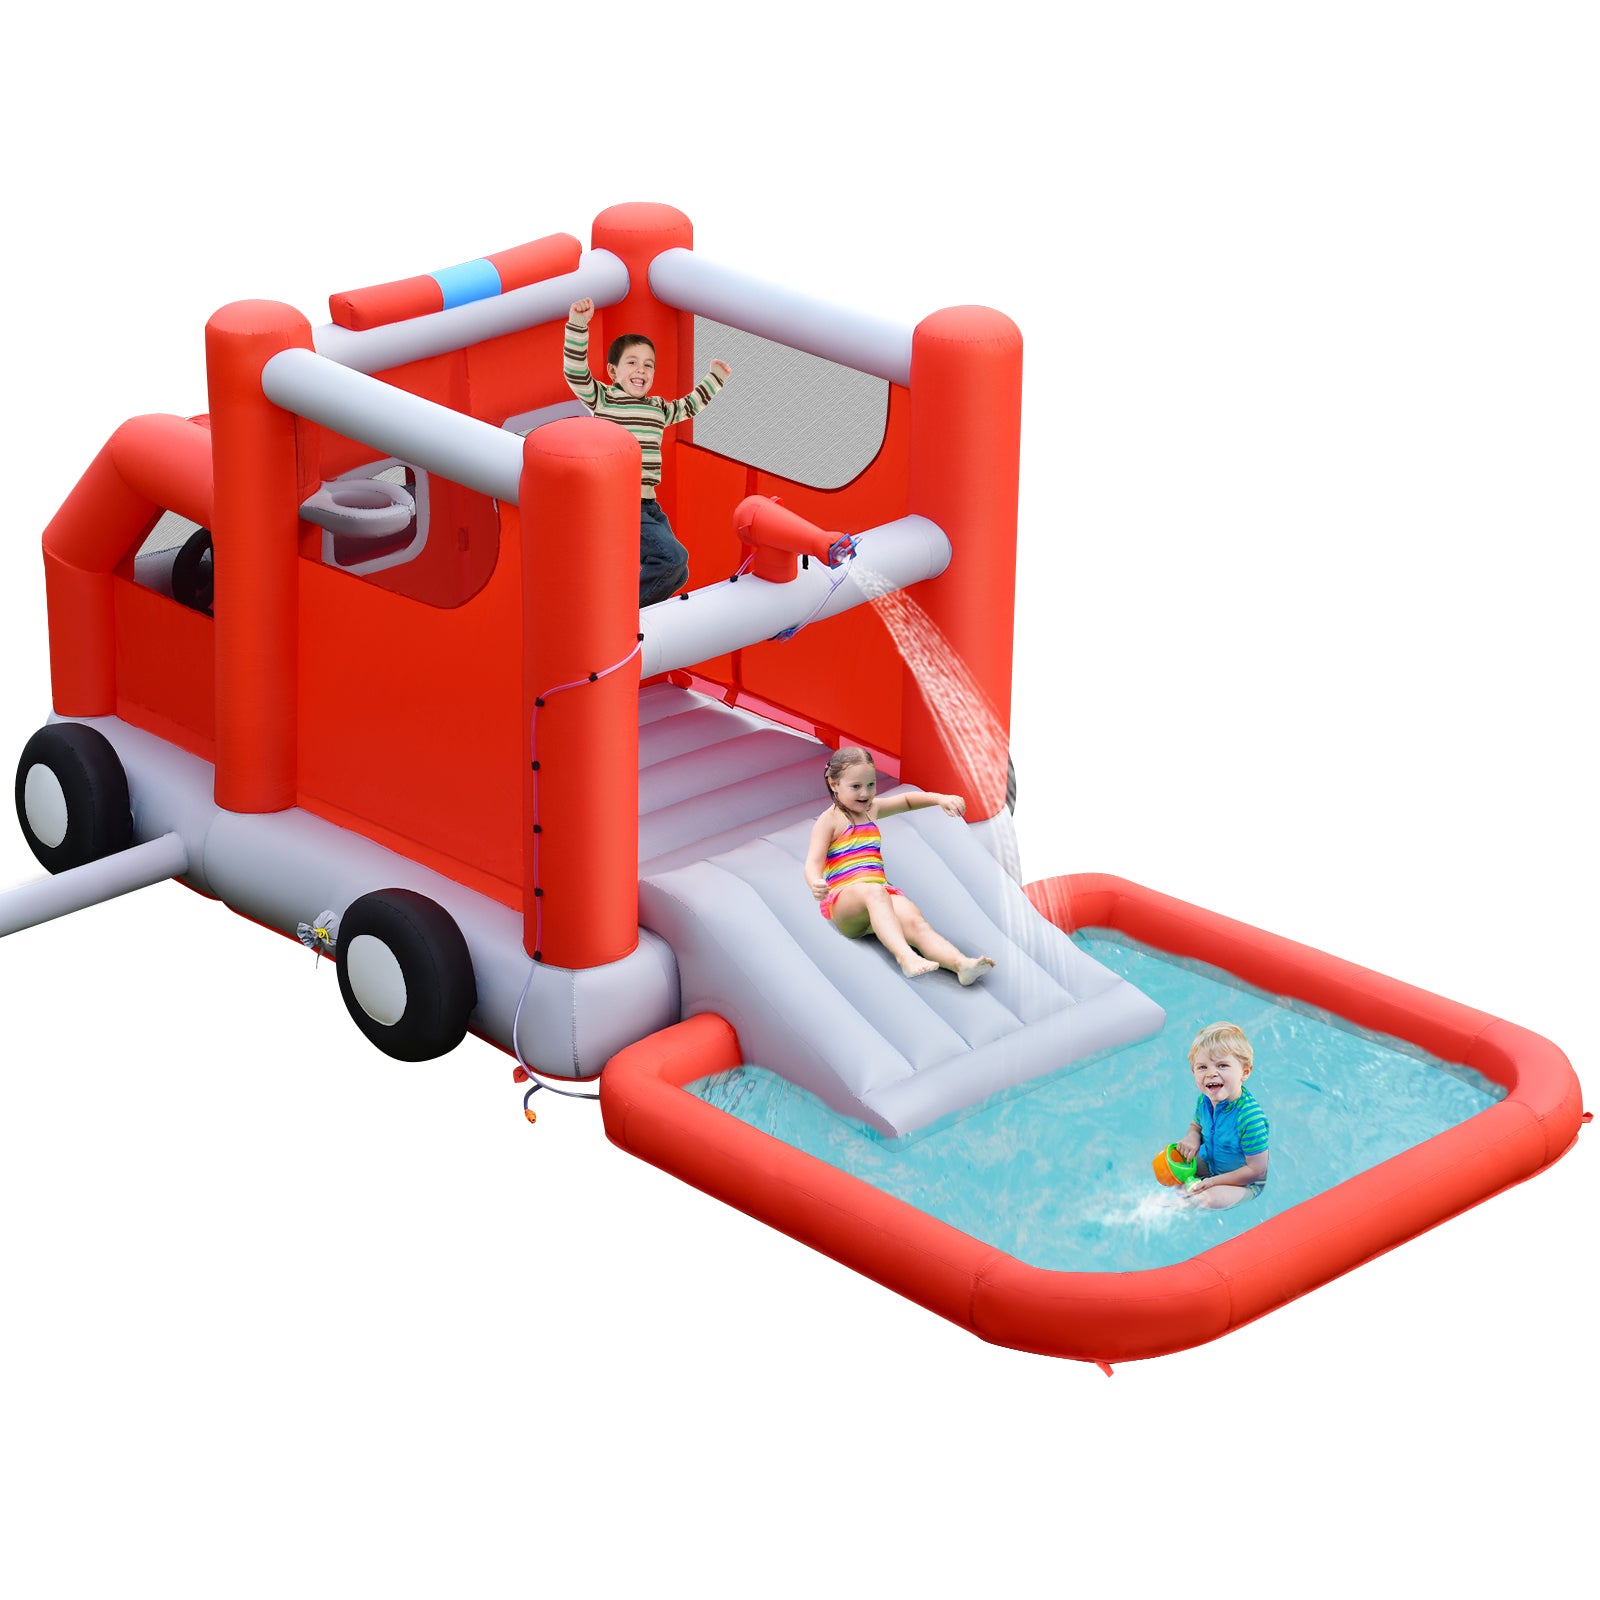 Firefighting-Themed Inflatable Water Park with Slide